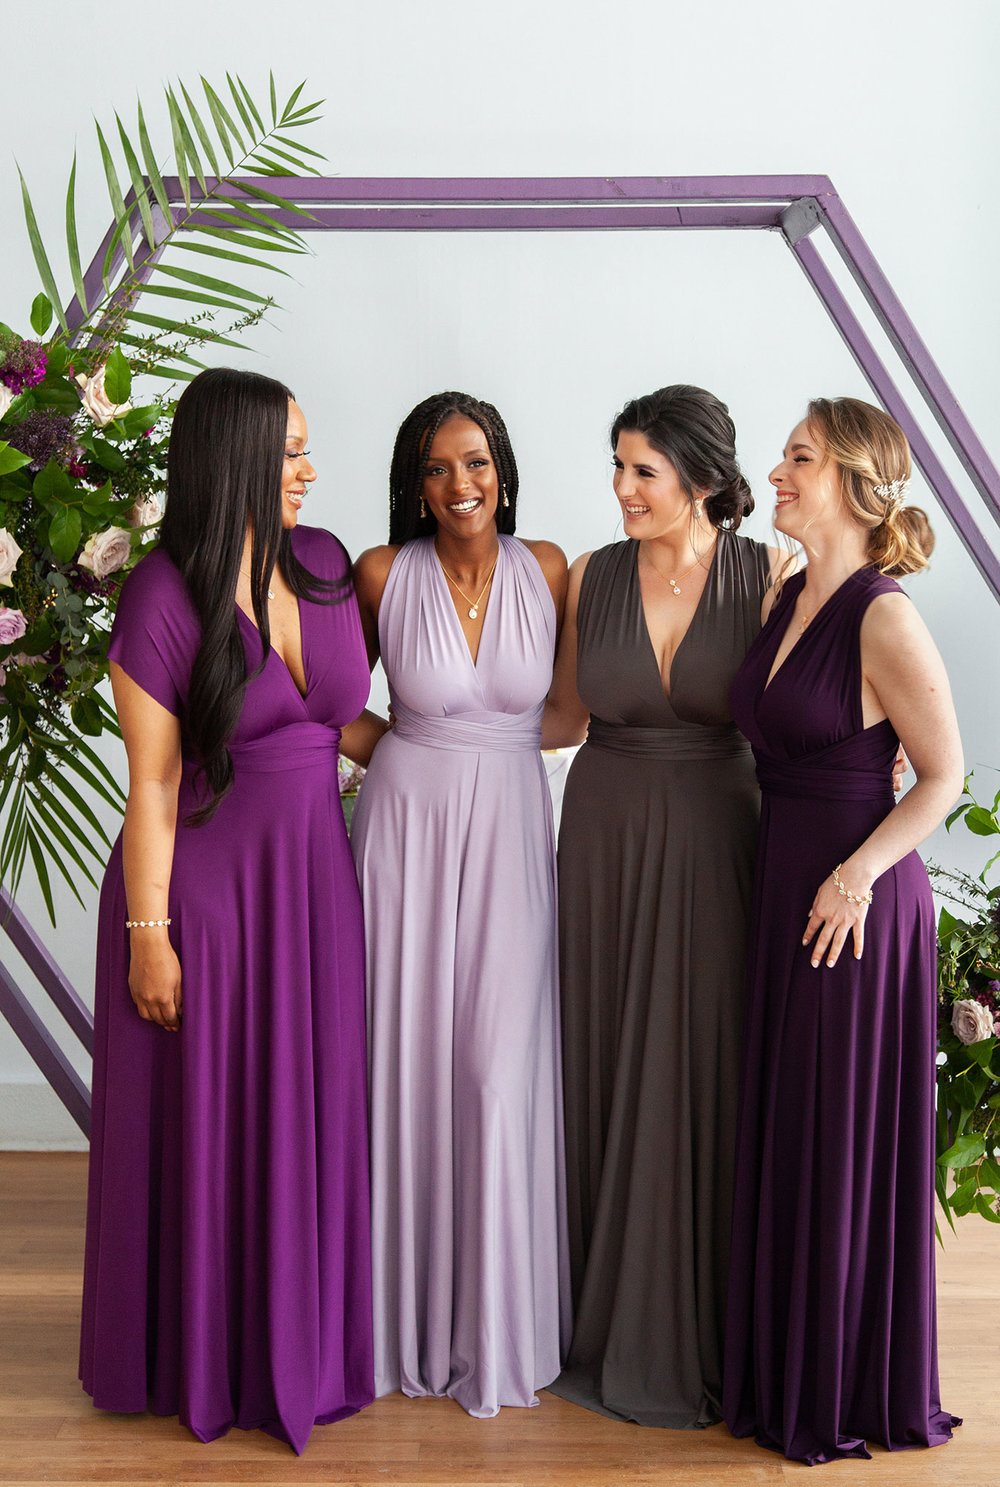 Henkaa fall wedding party dresses in purple and gray tones